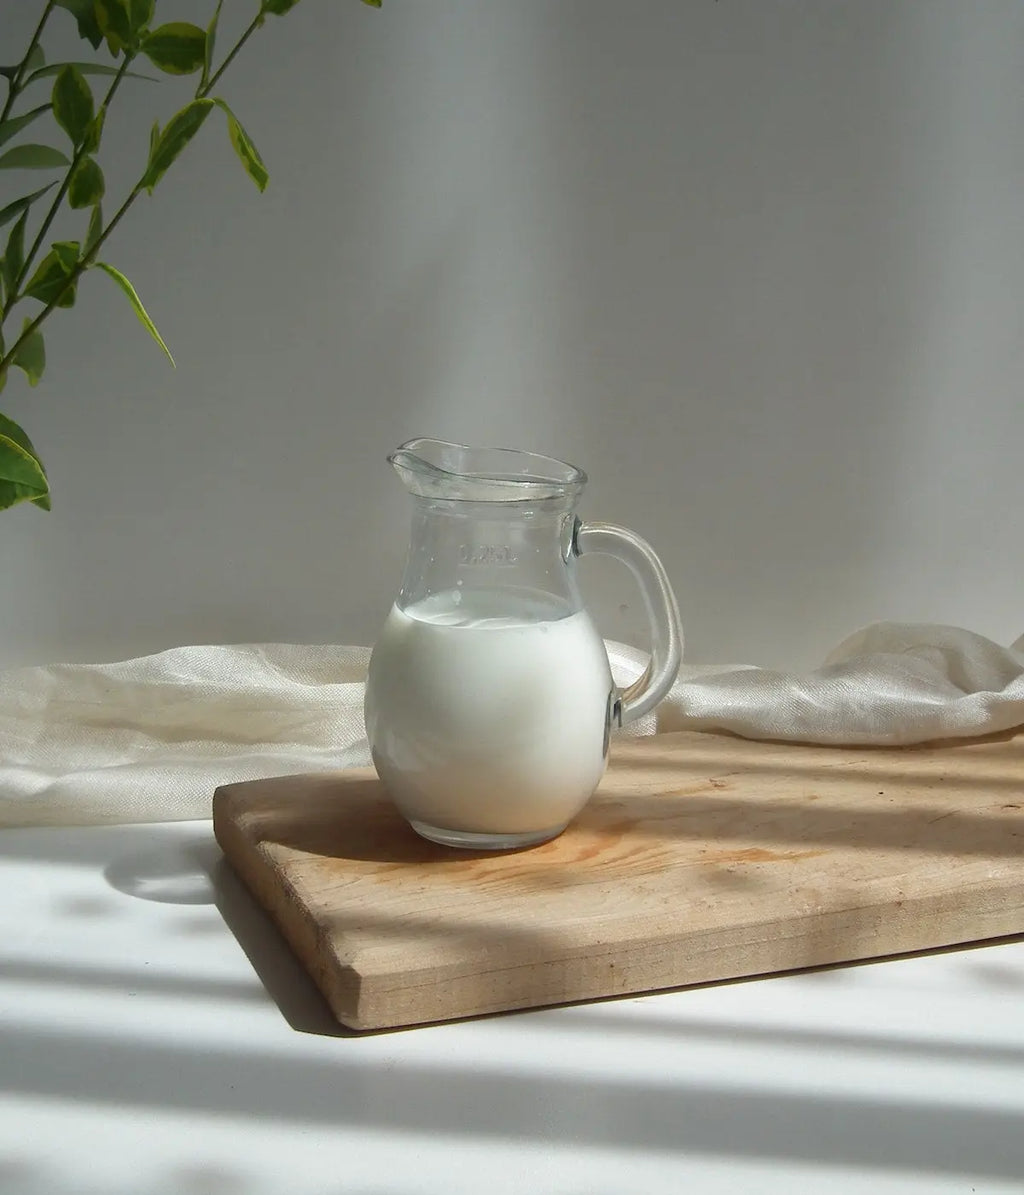 The Pitcher Method: Storing Breast Milk in a Pitcher - Exclusive